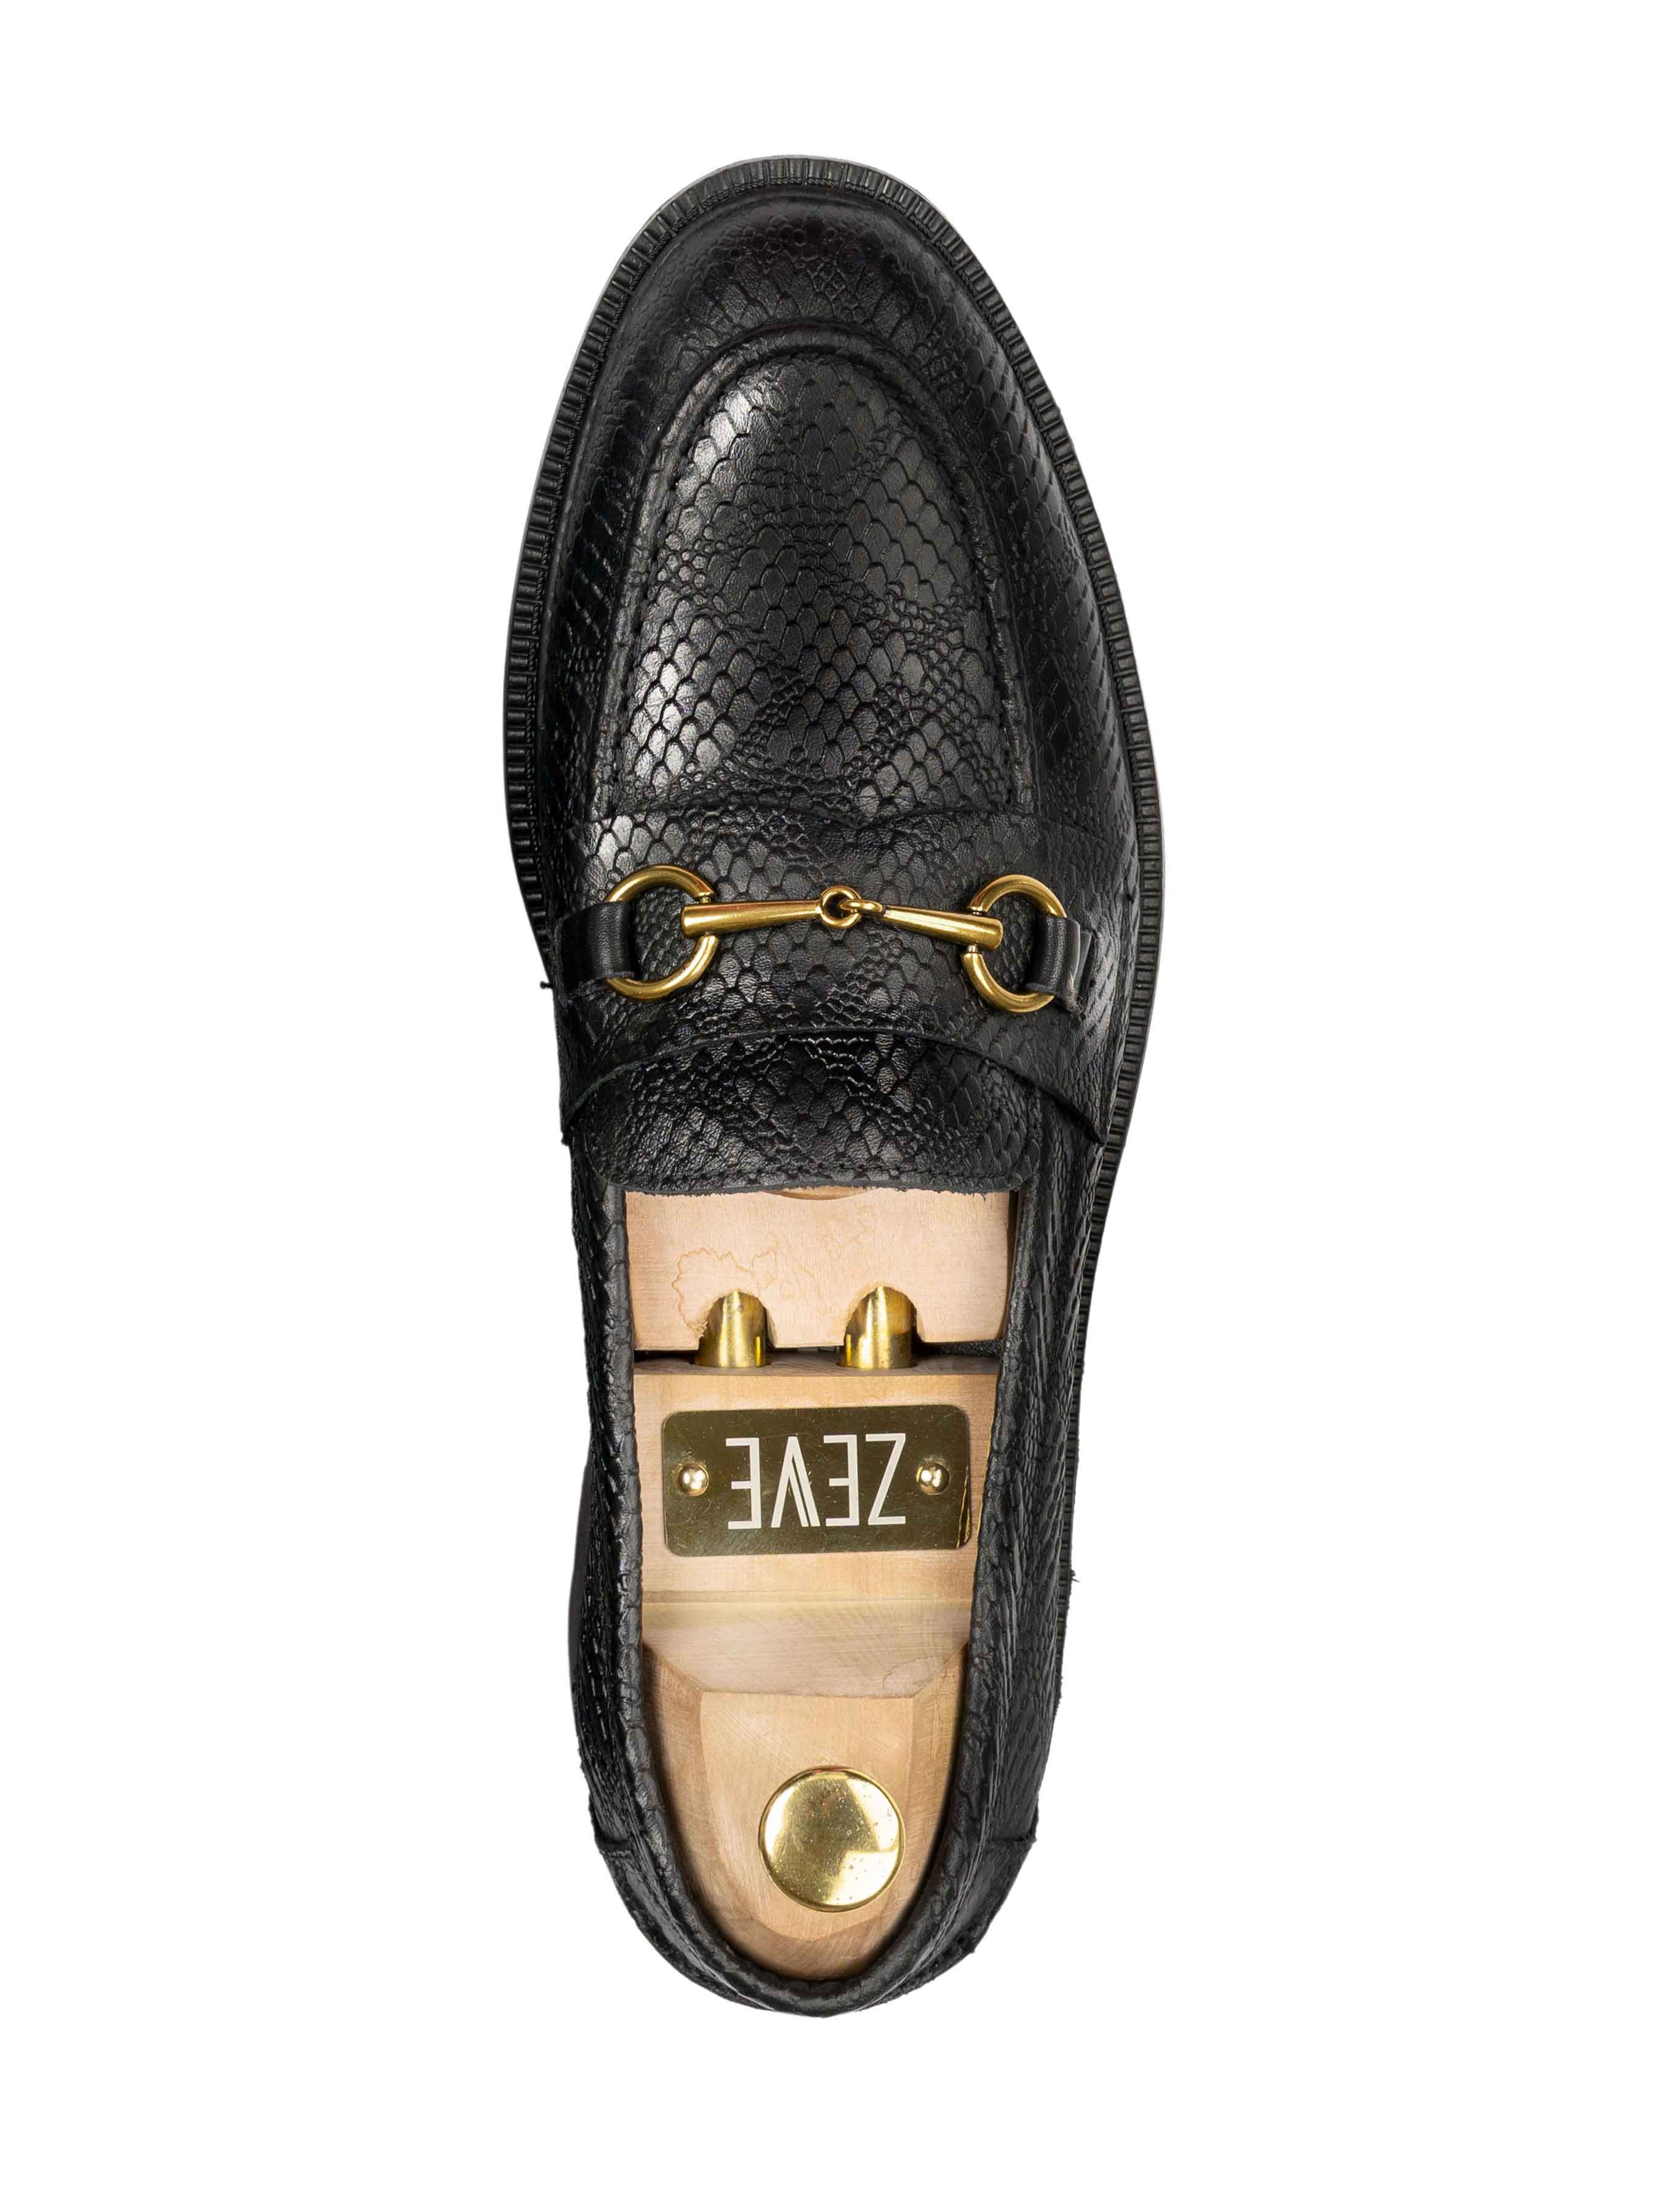 Penny Loafer Horsebit Buckle - Black Phyton Leather (Combat Sole)